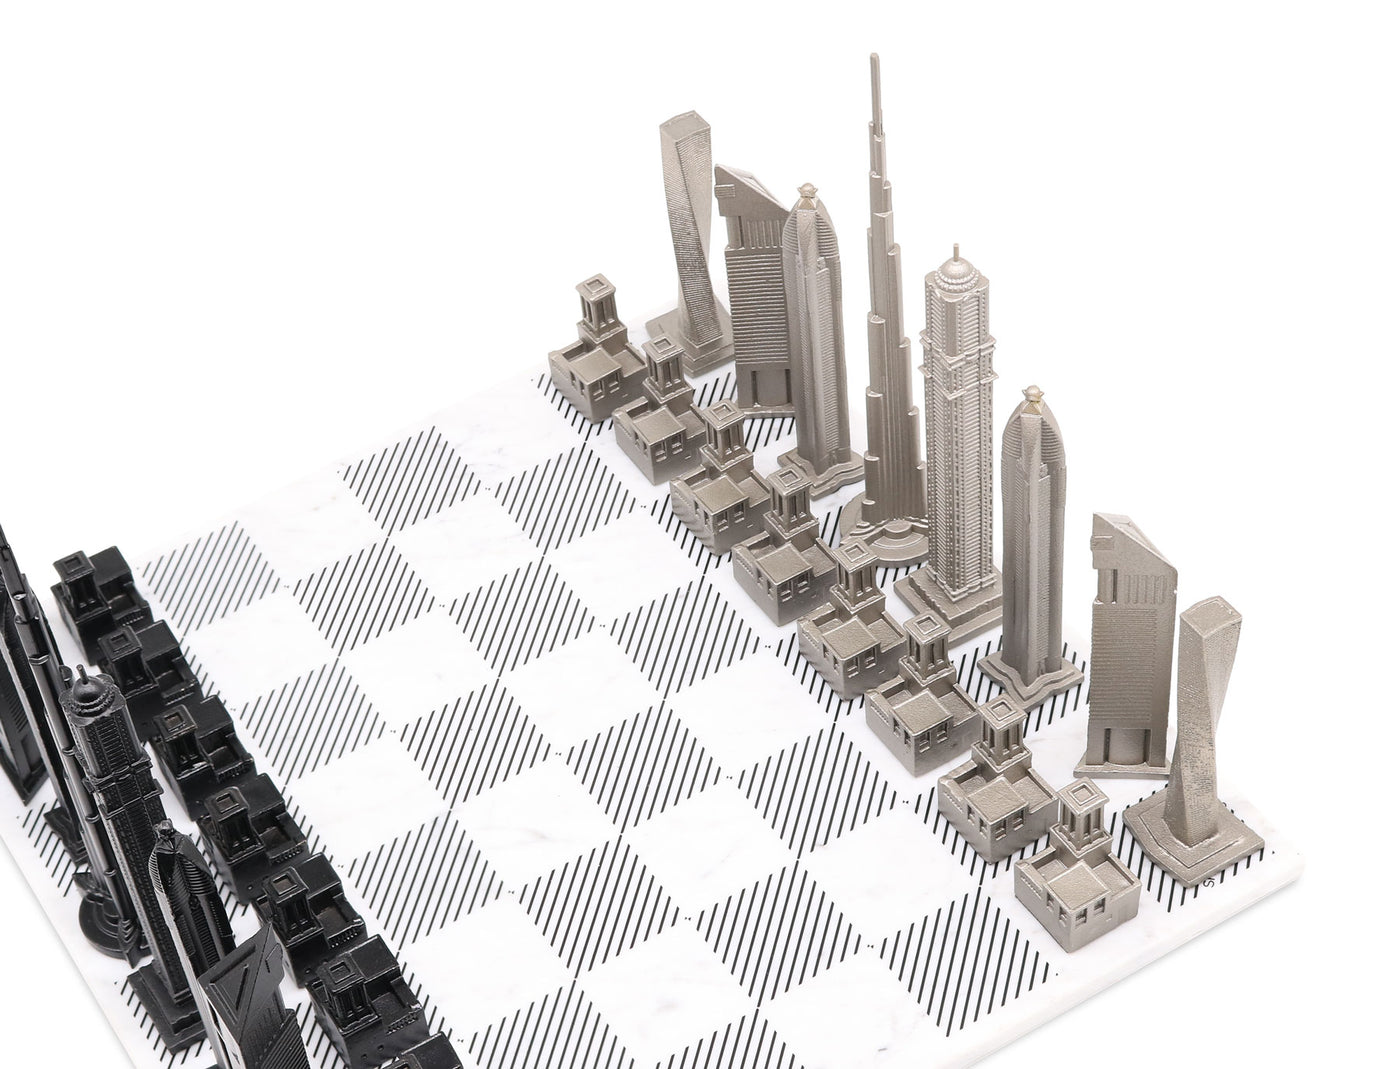 Skyline Chess Dubai unique set up chess board with personalized messageBuy Dubai unique chess set on marble chess board